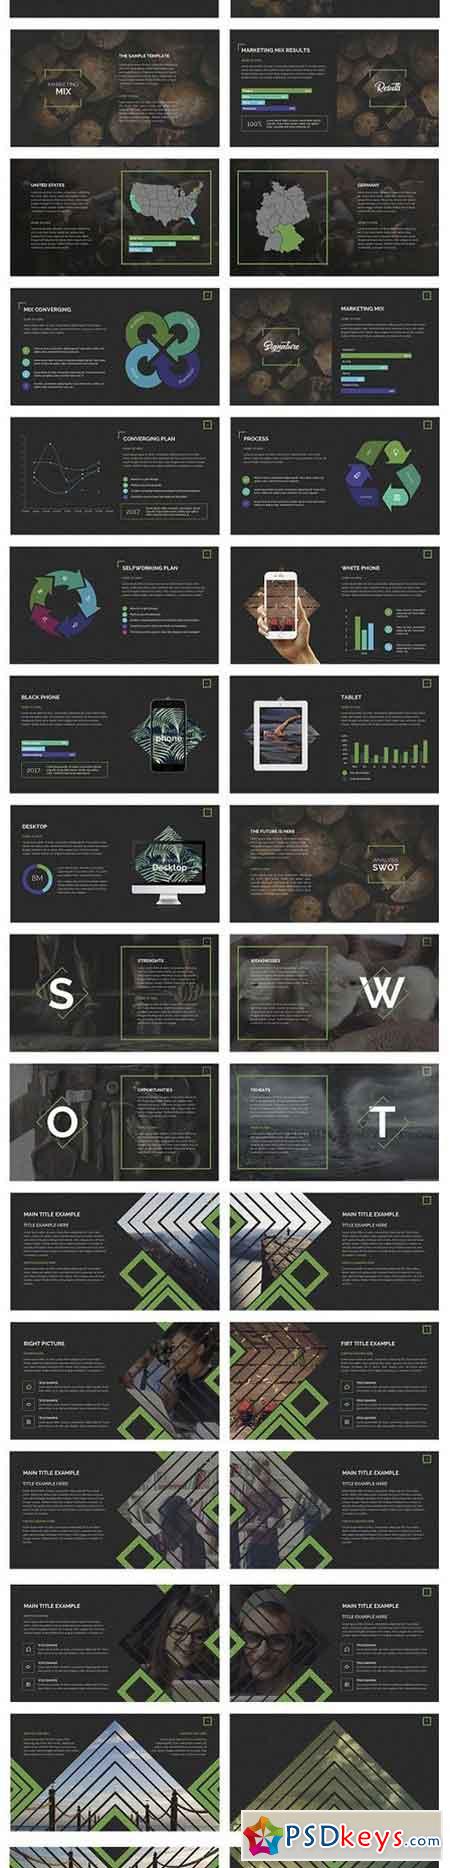 Wook Powerpoint Template 1292814